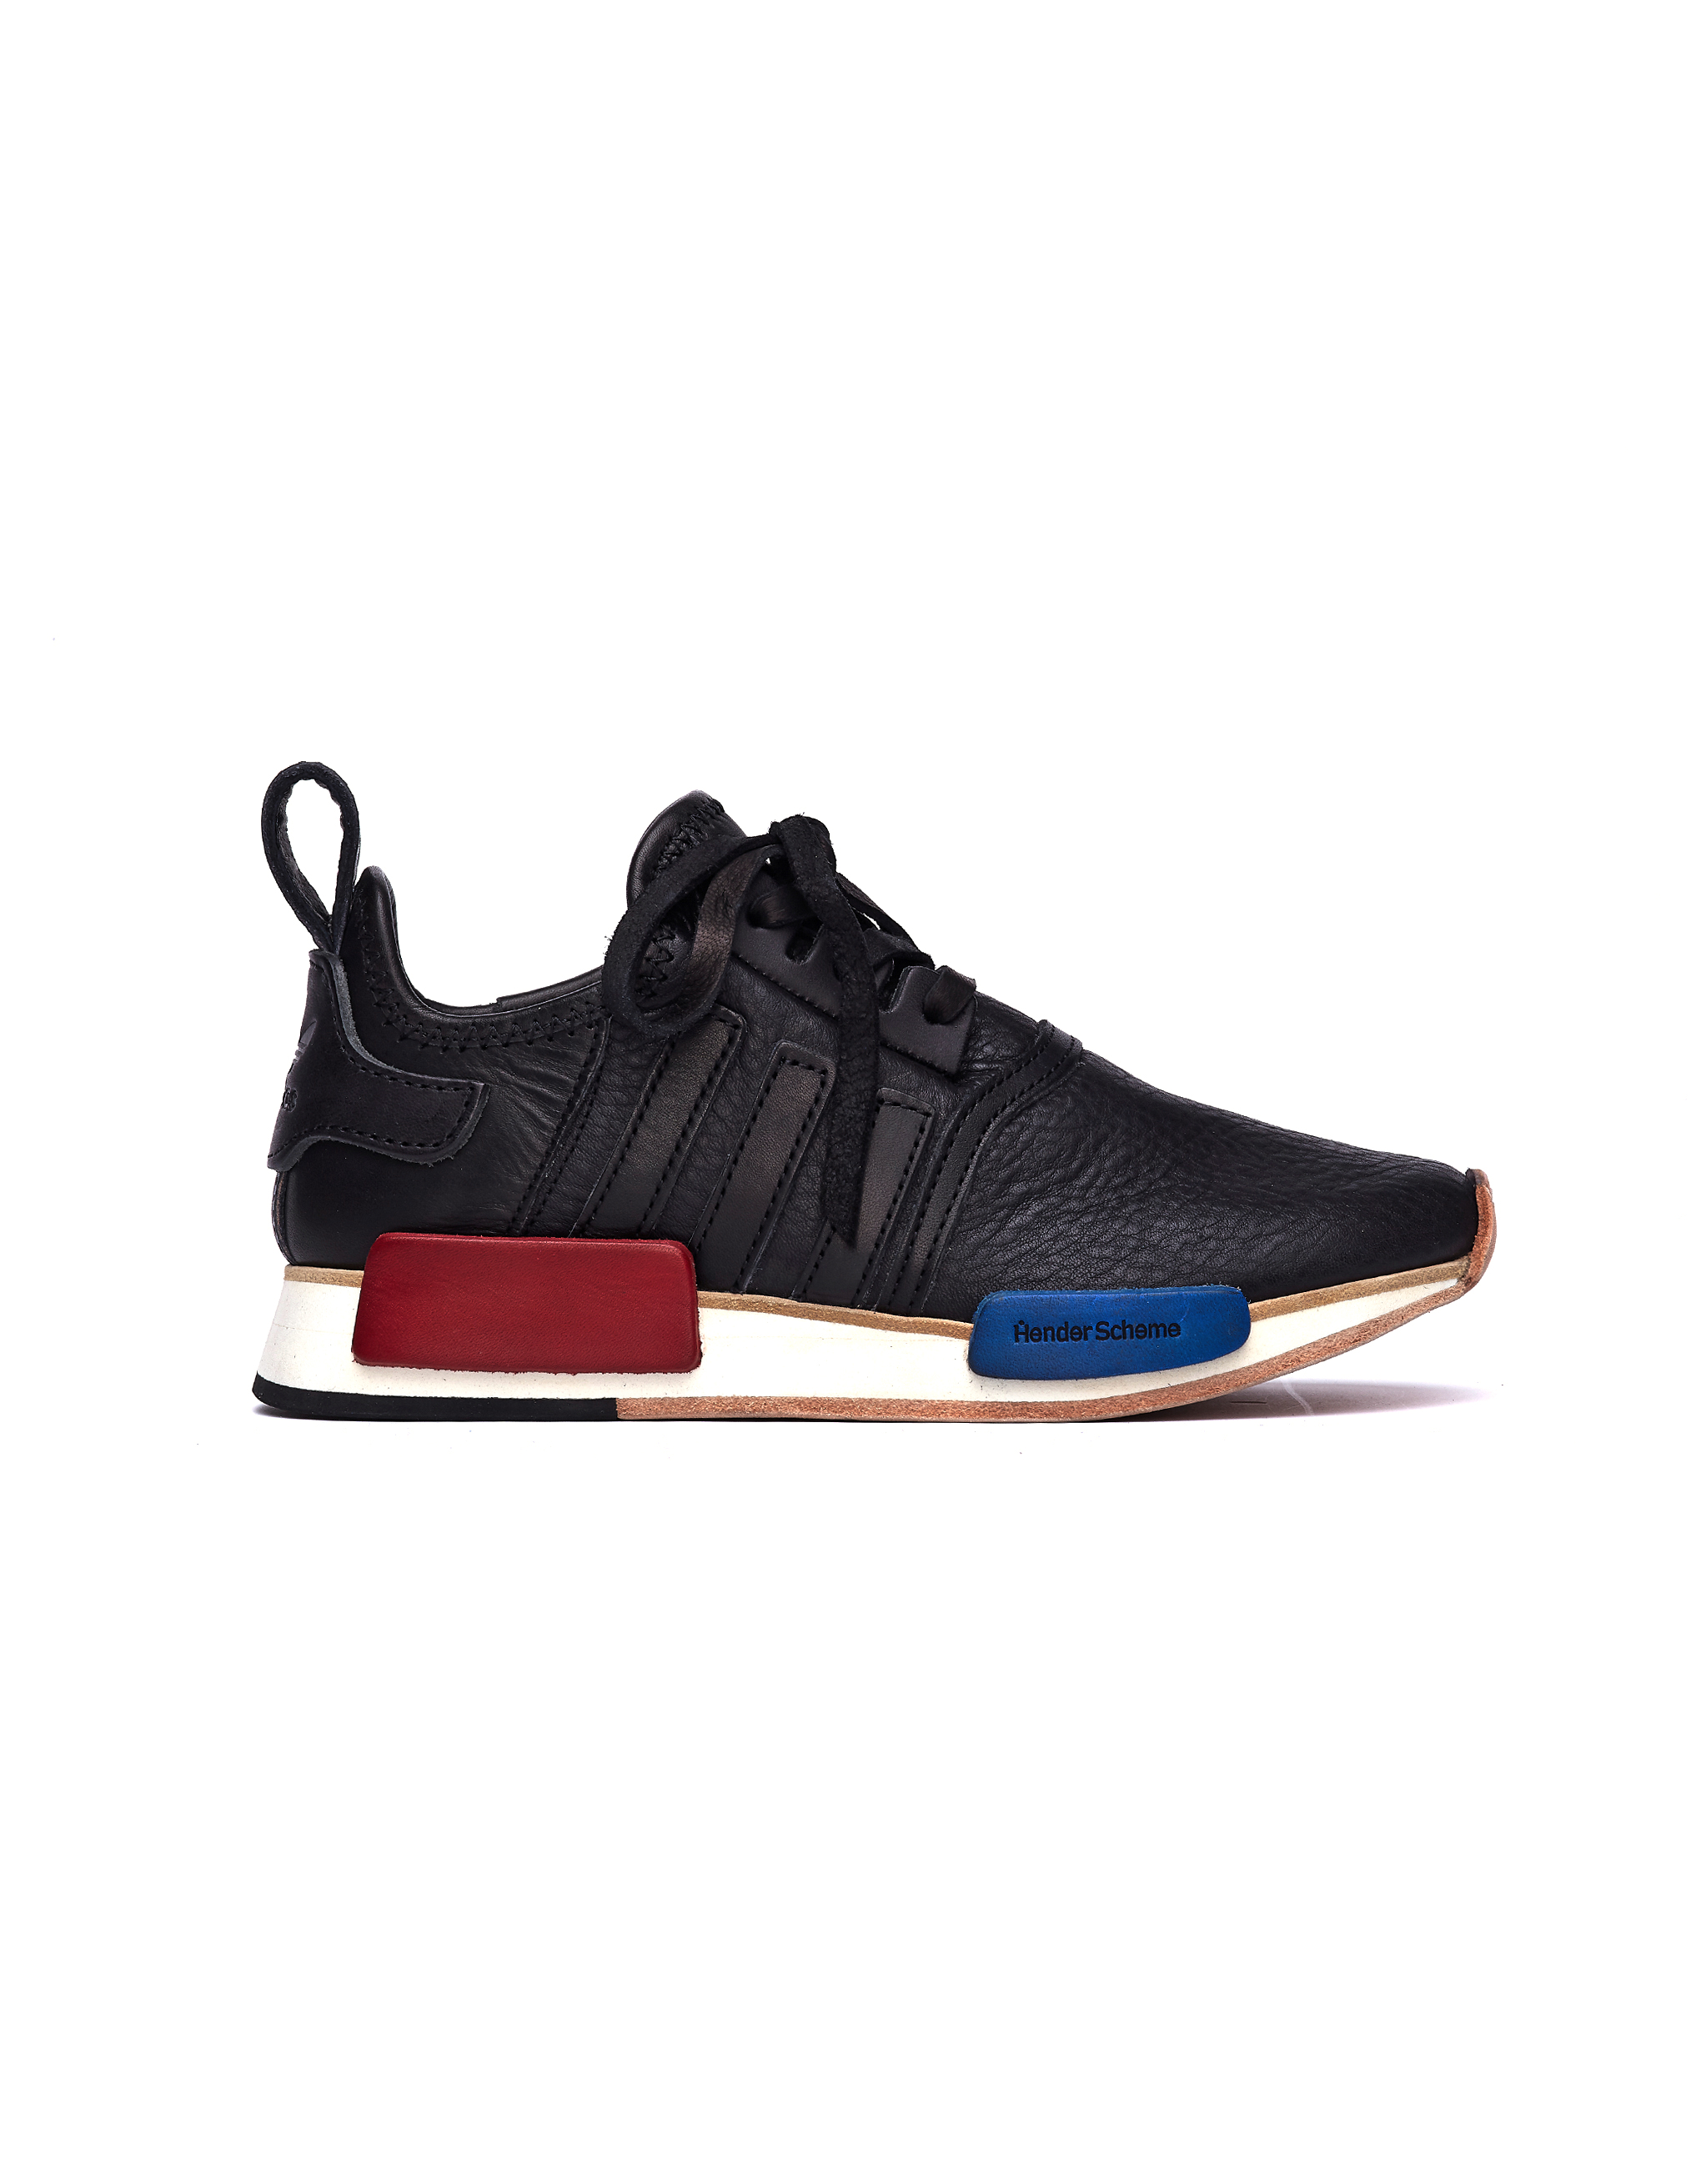 Adidas NMD R1 Black Leather Sneakers 